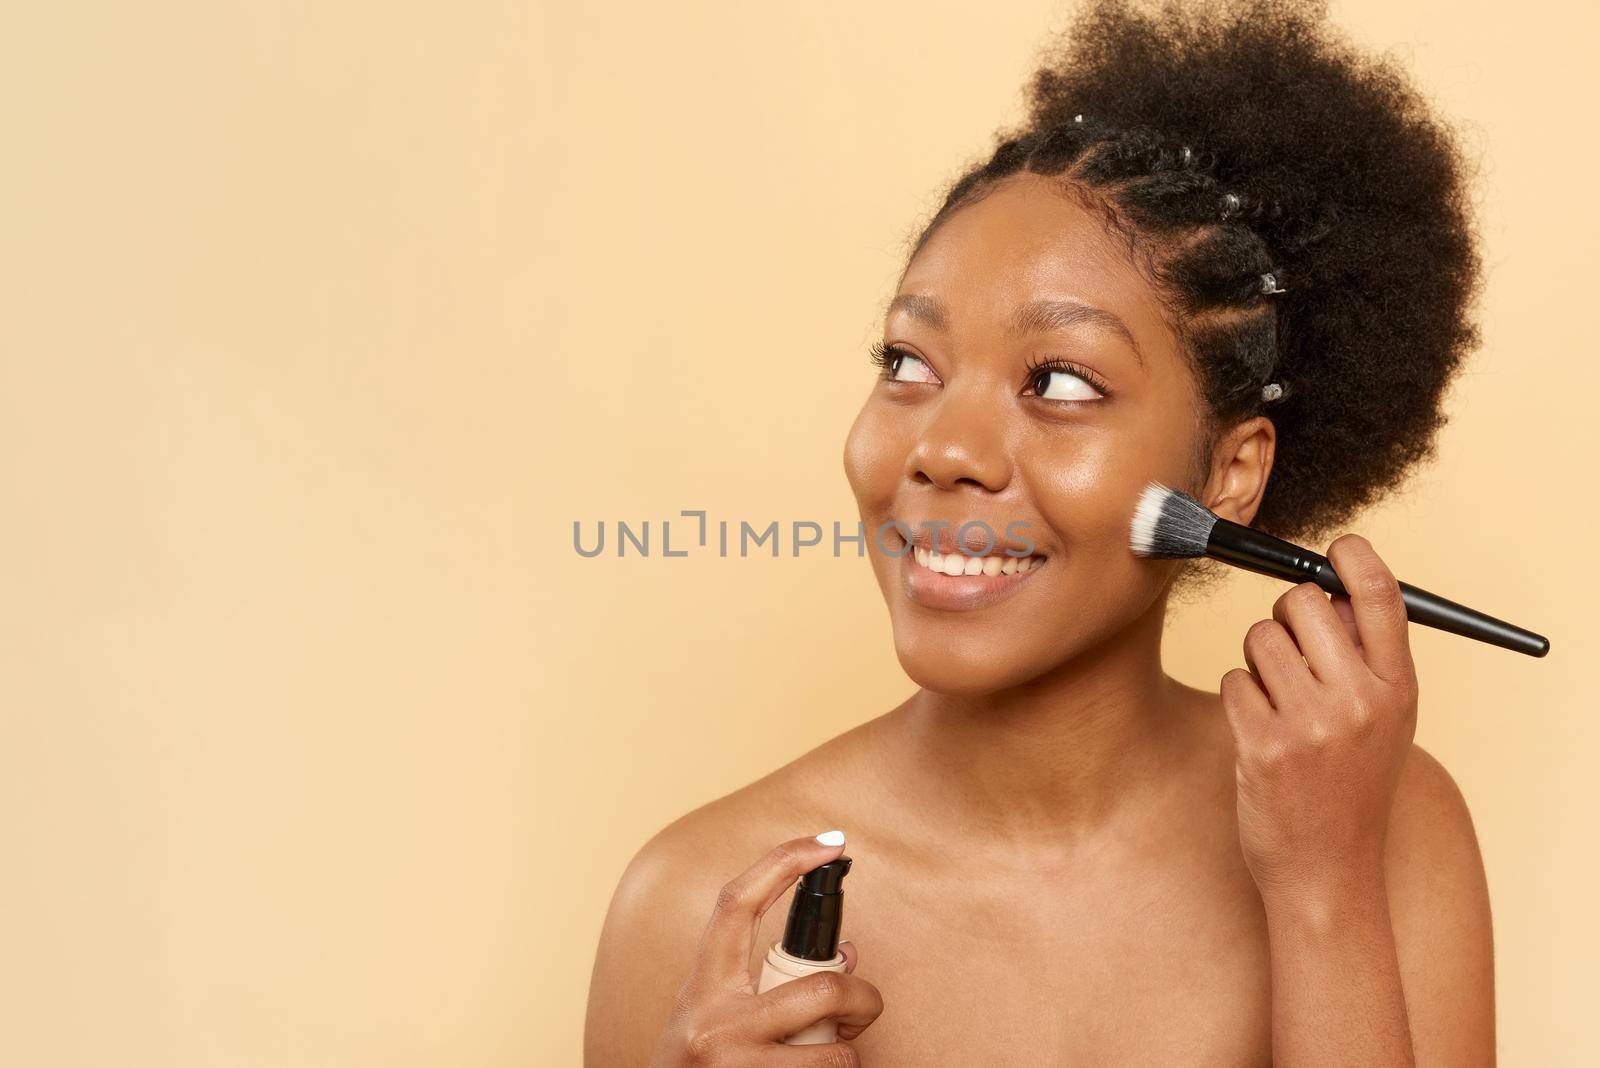 Beautiful smiling woman applying foundation on her face on a beige background. Makeup concept and copy space.